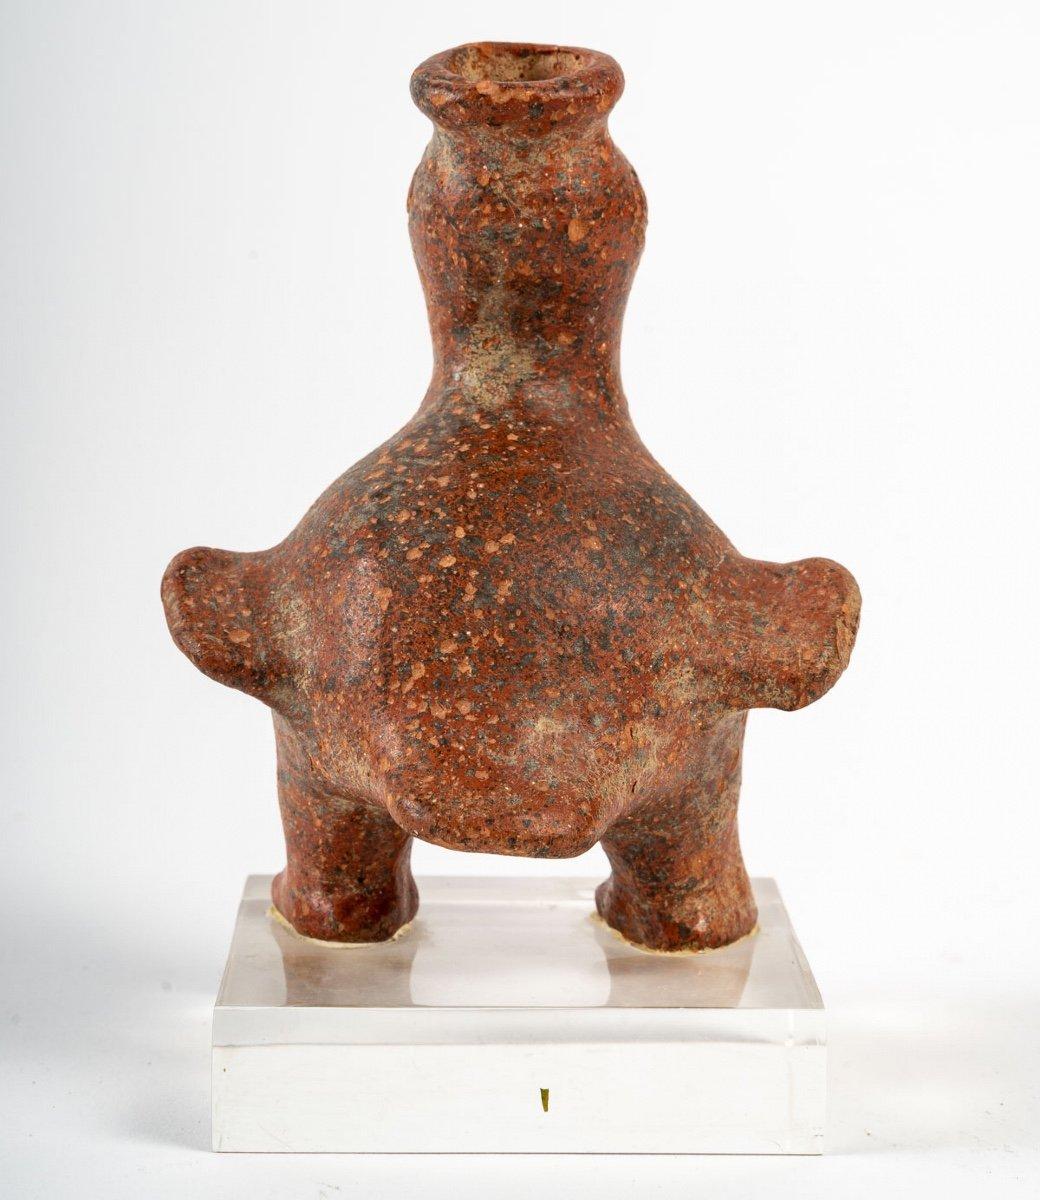 Pre-Columbian Zoomorphic Pottery, Western Region of Mexico 1